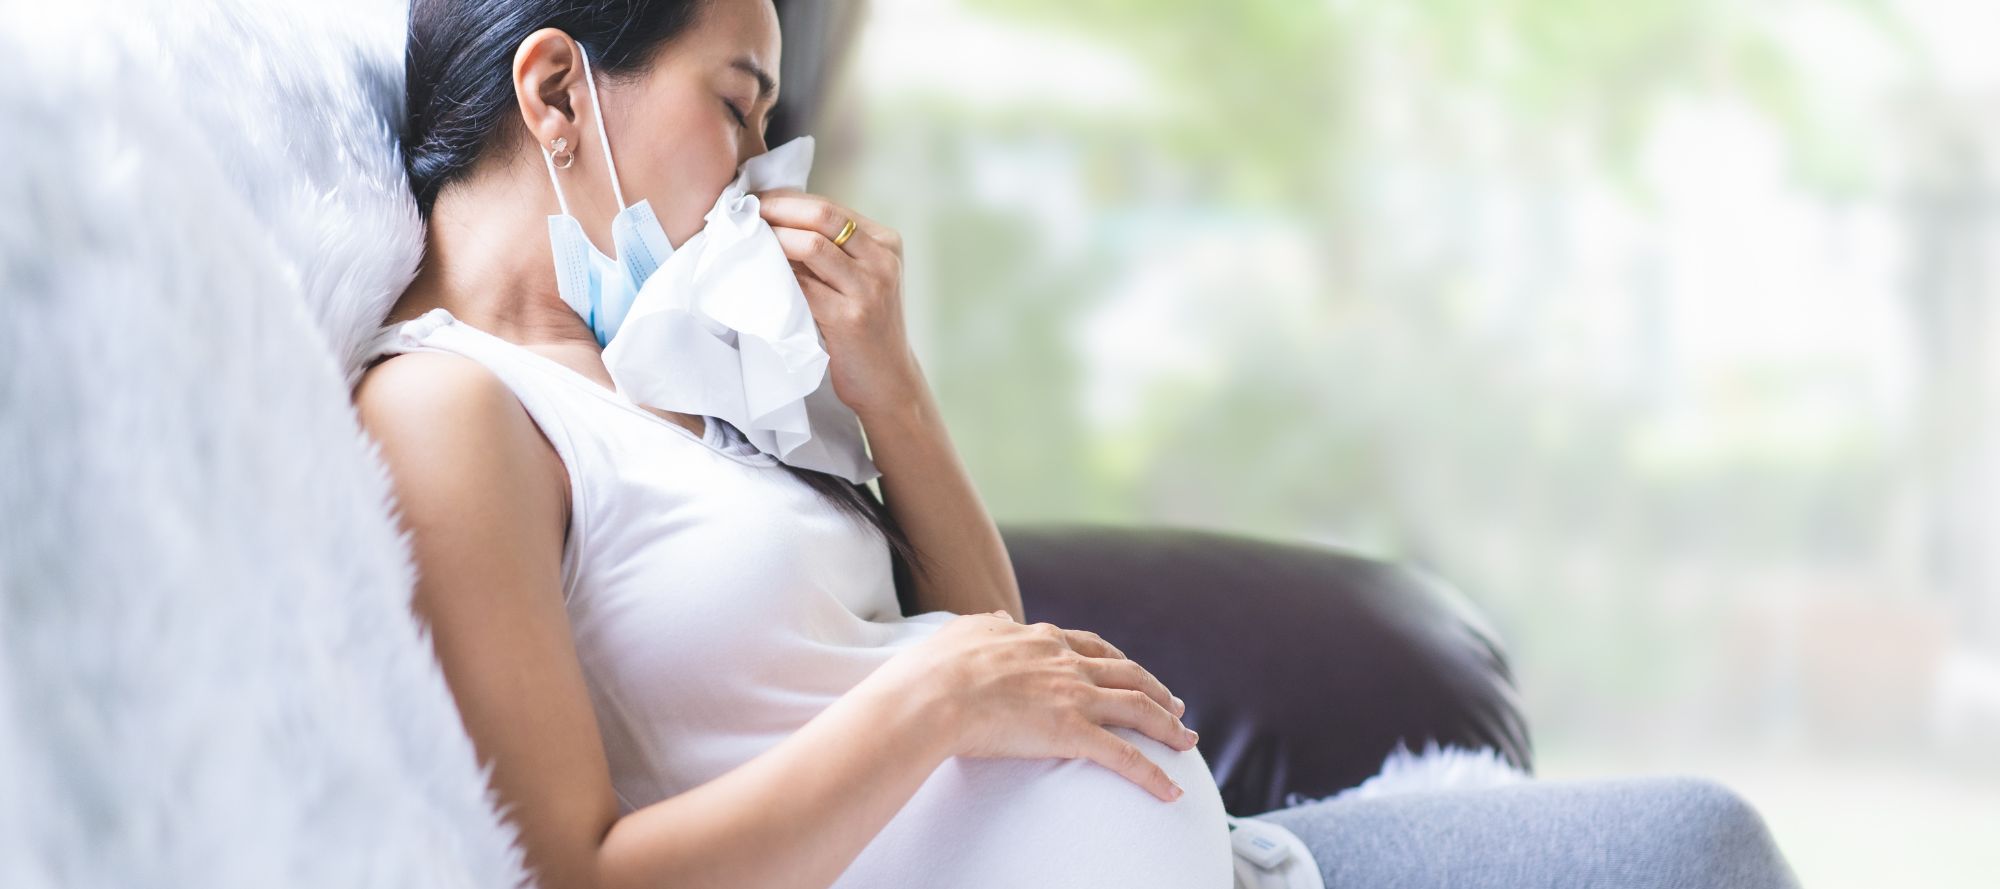 Asian pregnant woman unwell with the symptom of fever, runny nose and sneezing of viral infection and allergy, concept of sickness and healthcare in pregnancy in the situation of covid 19 outbreak